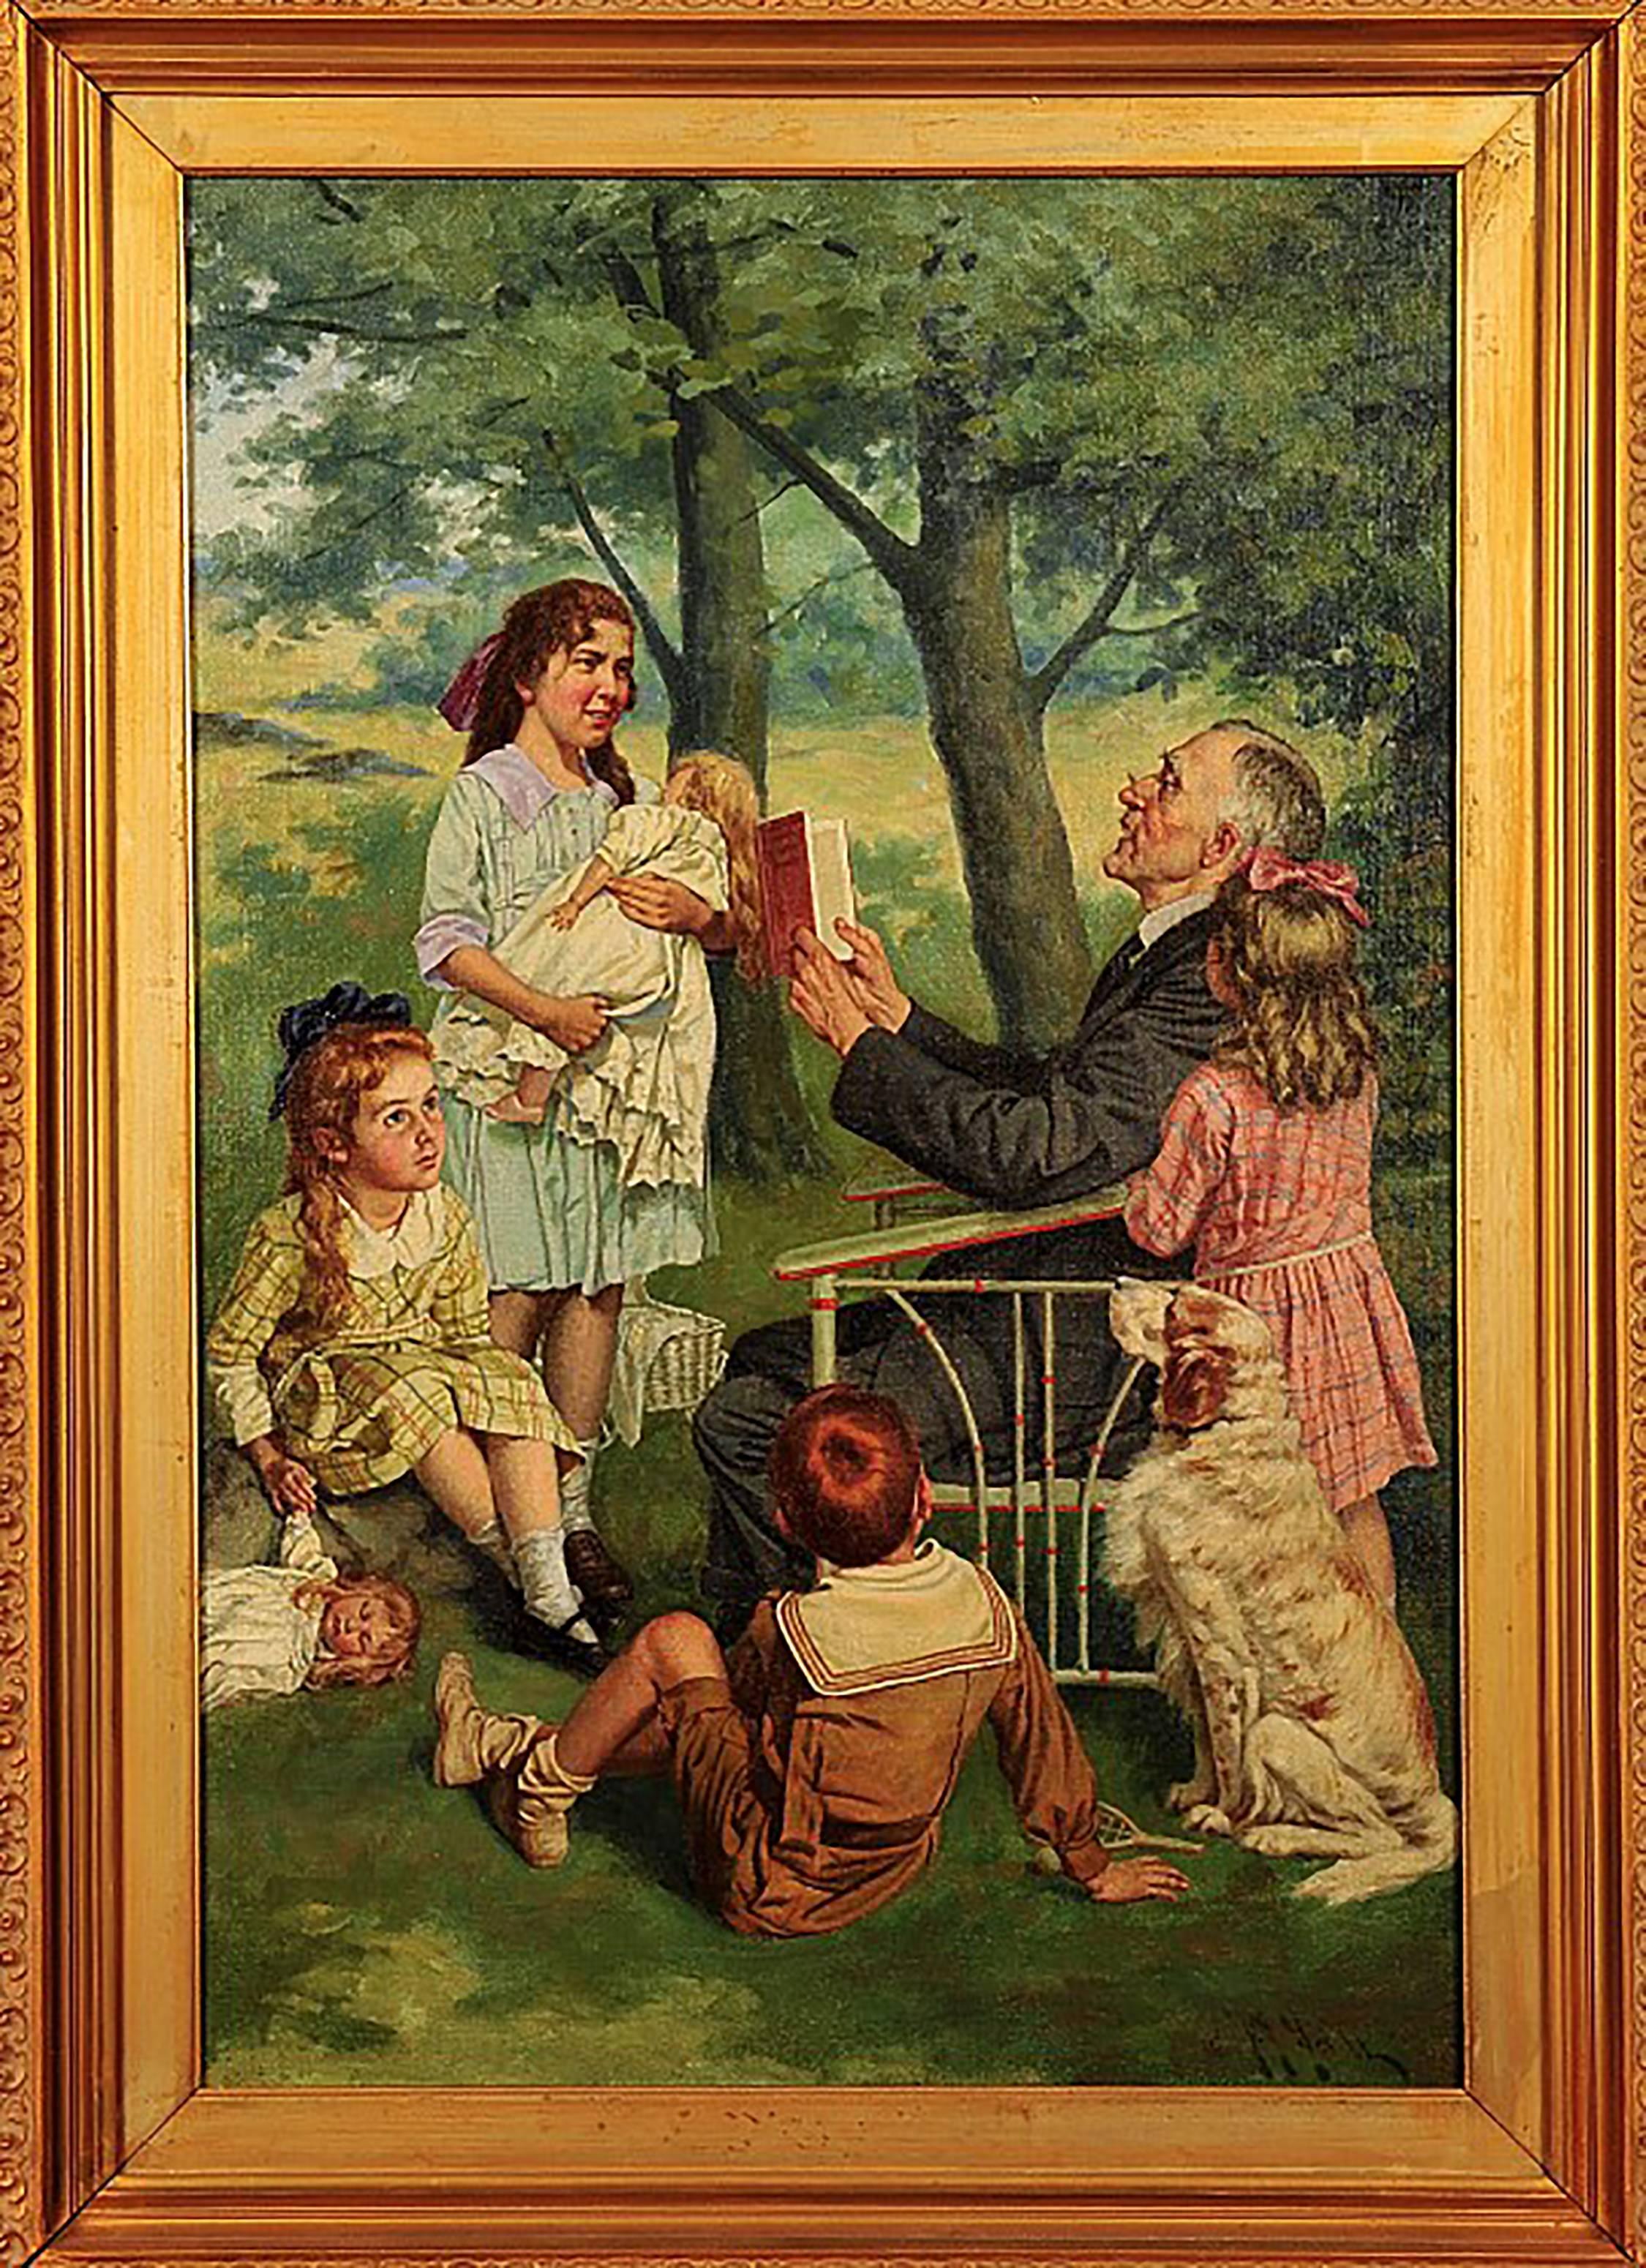 Storytime in the Park - Painting by P.J. Meylan